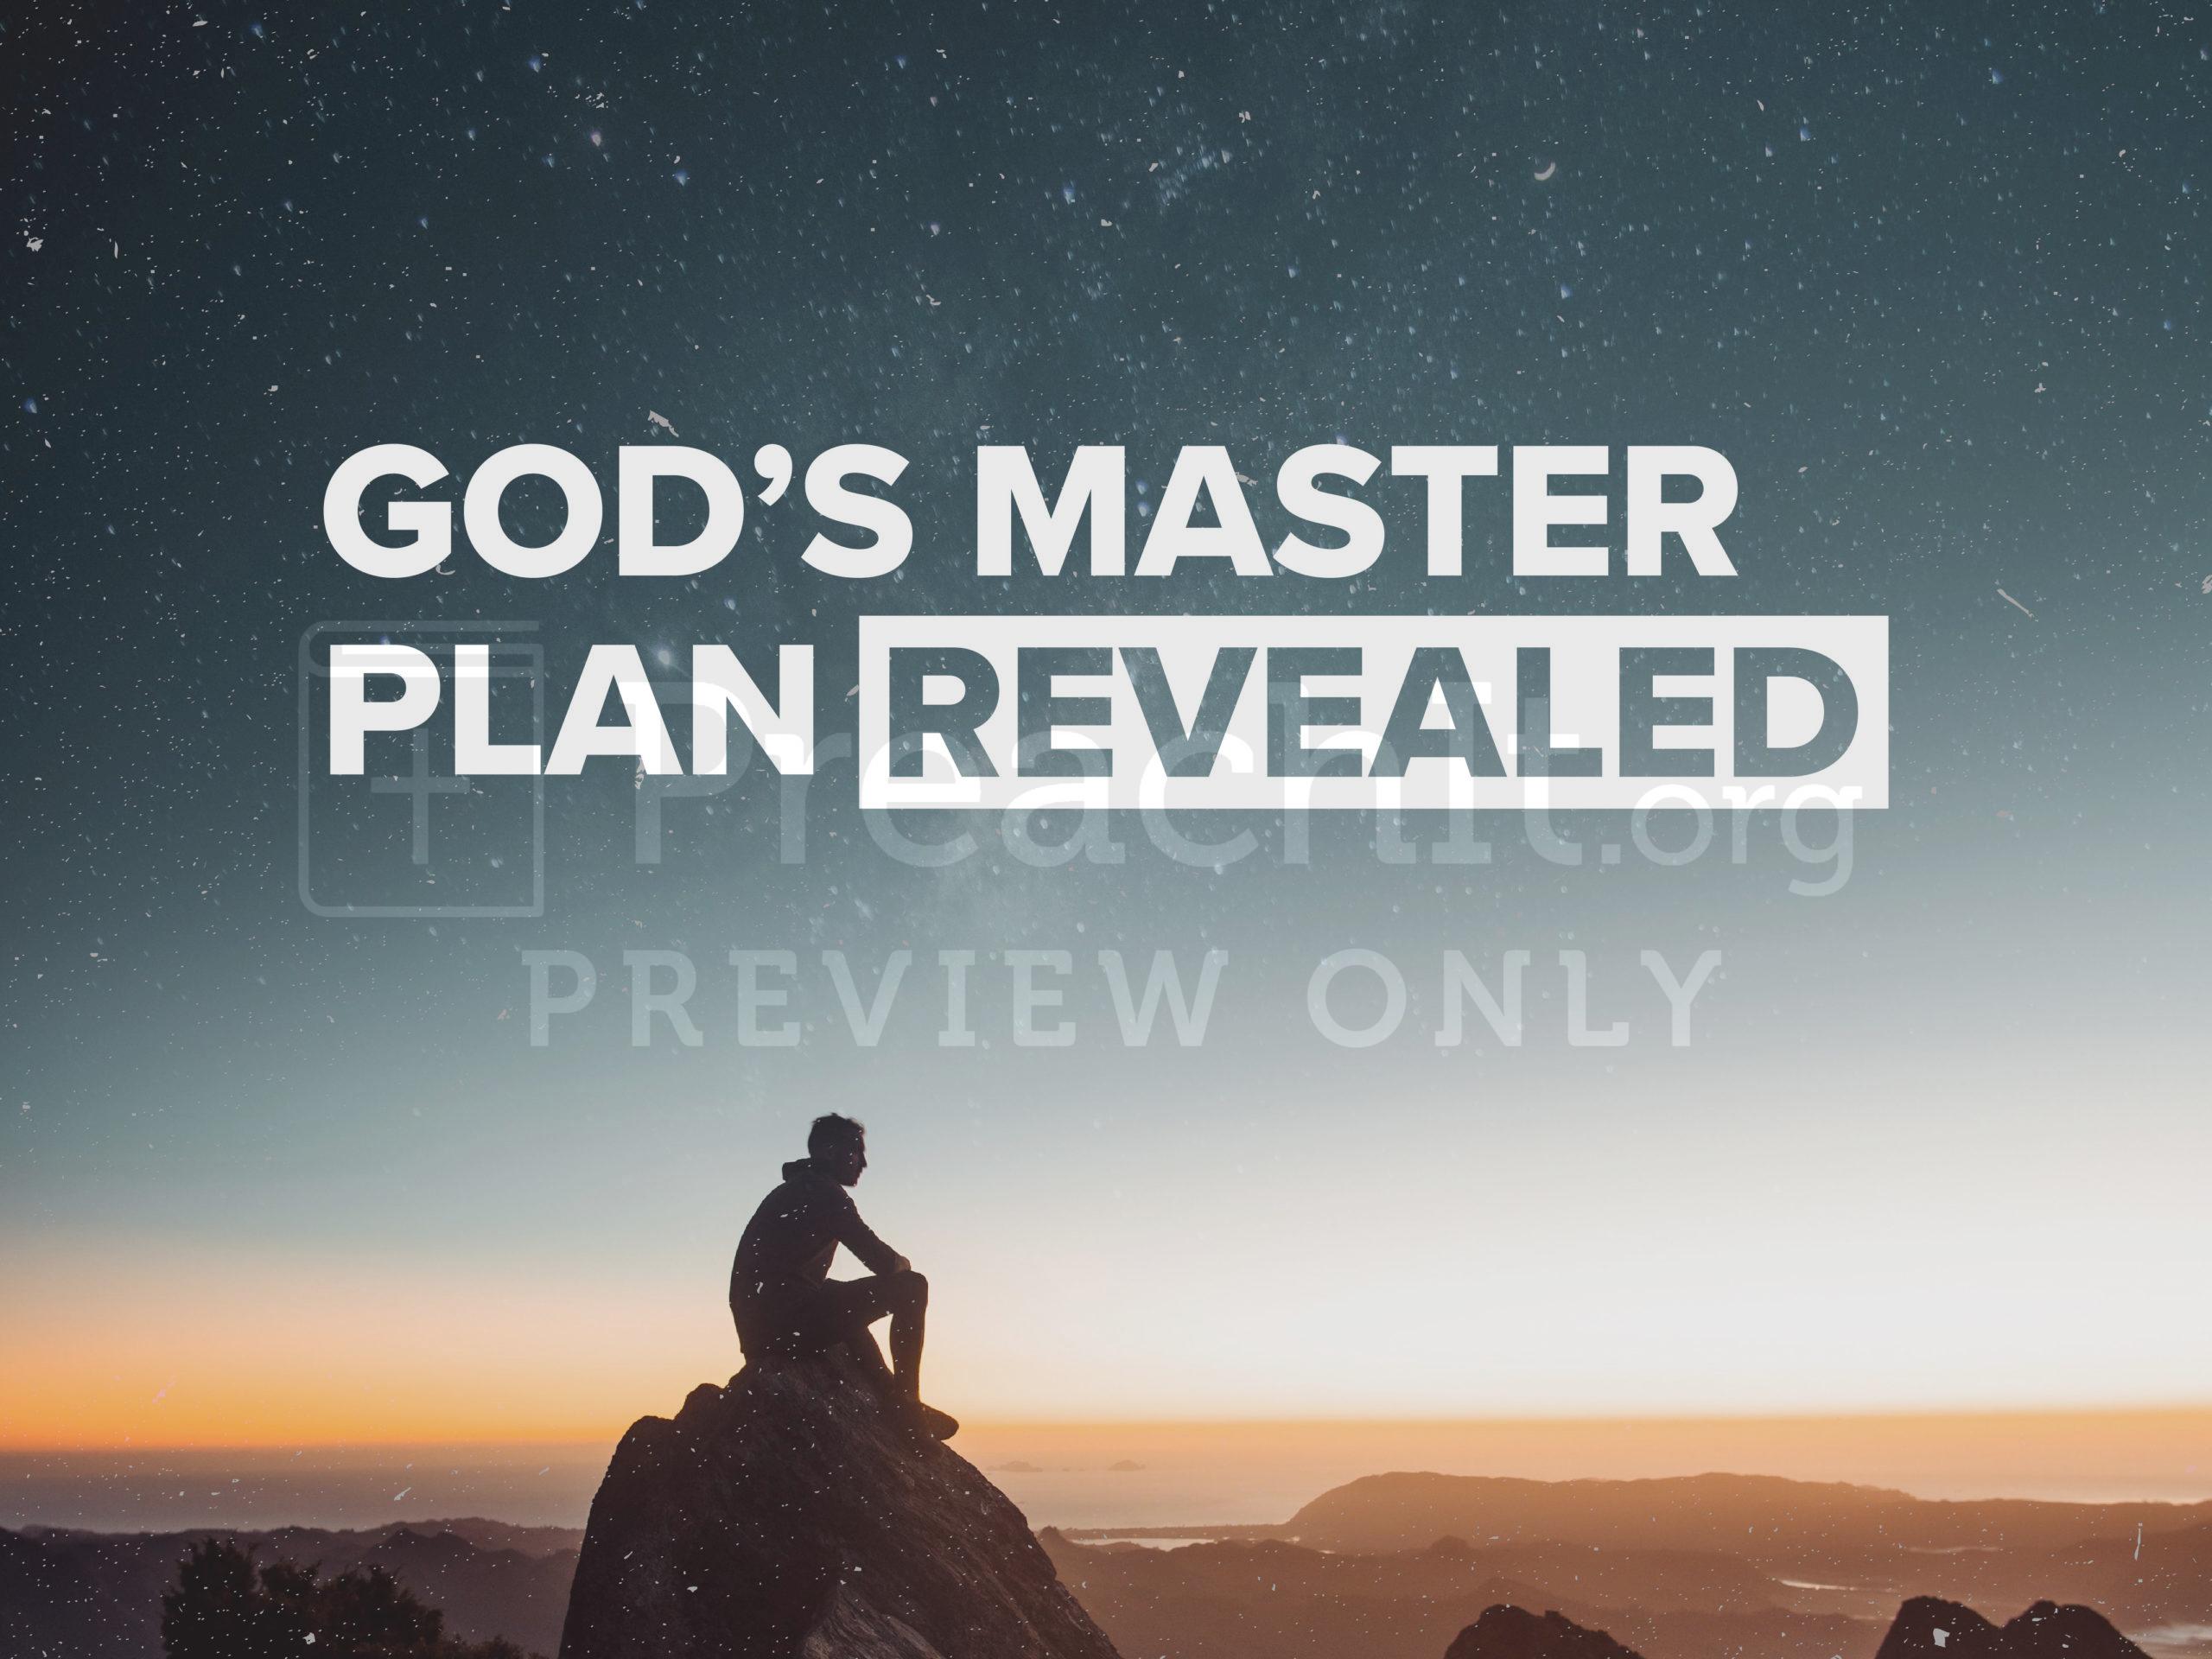 Lesson 1: Do You See What I See - God's Master Plan Revealed